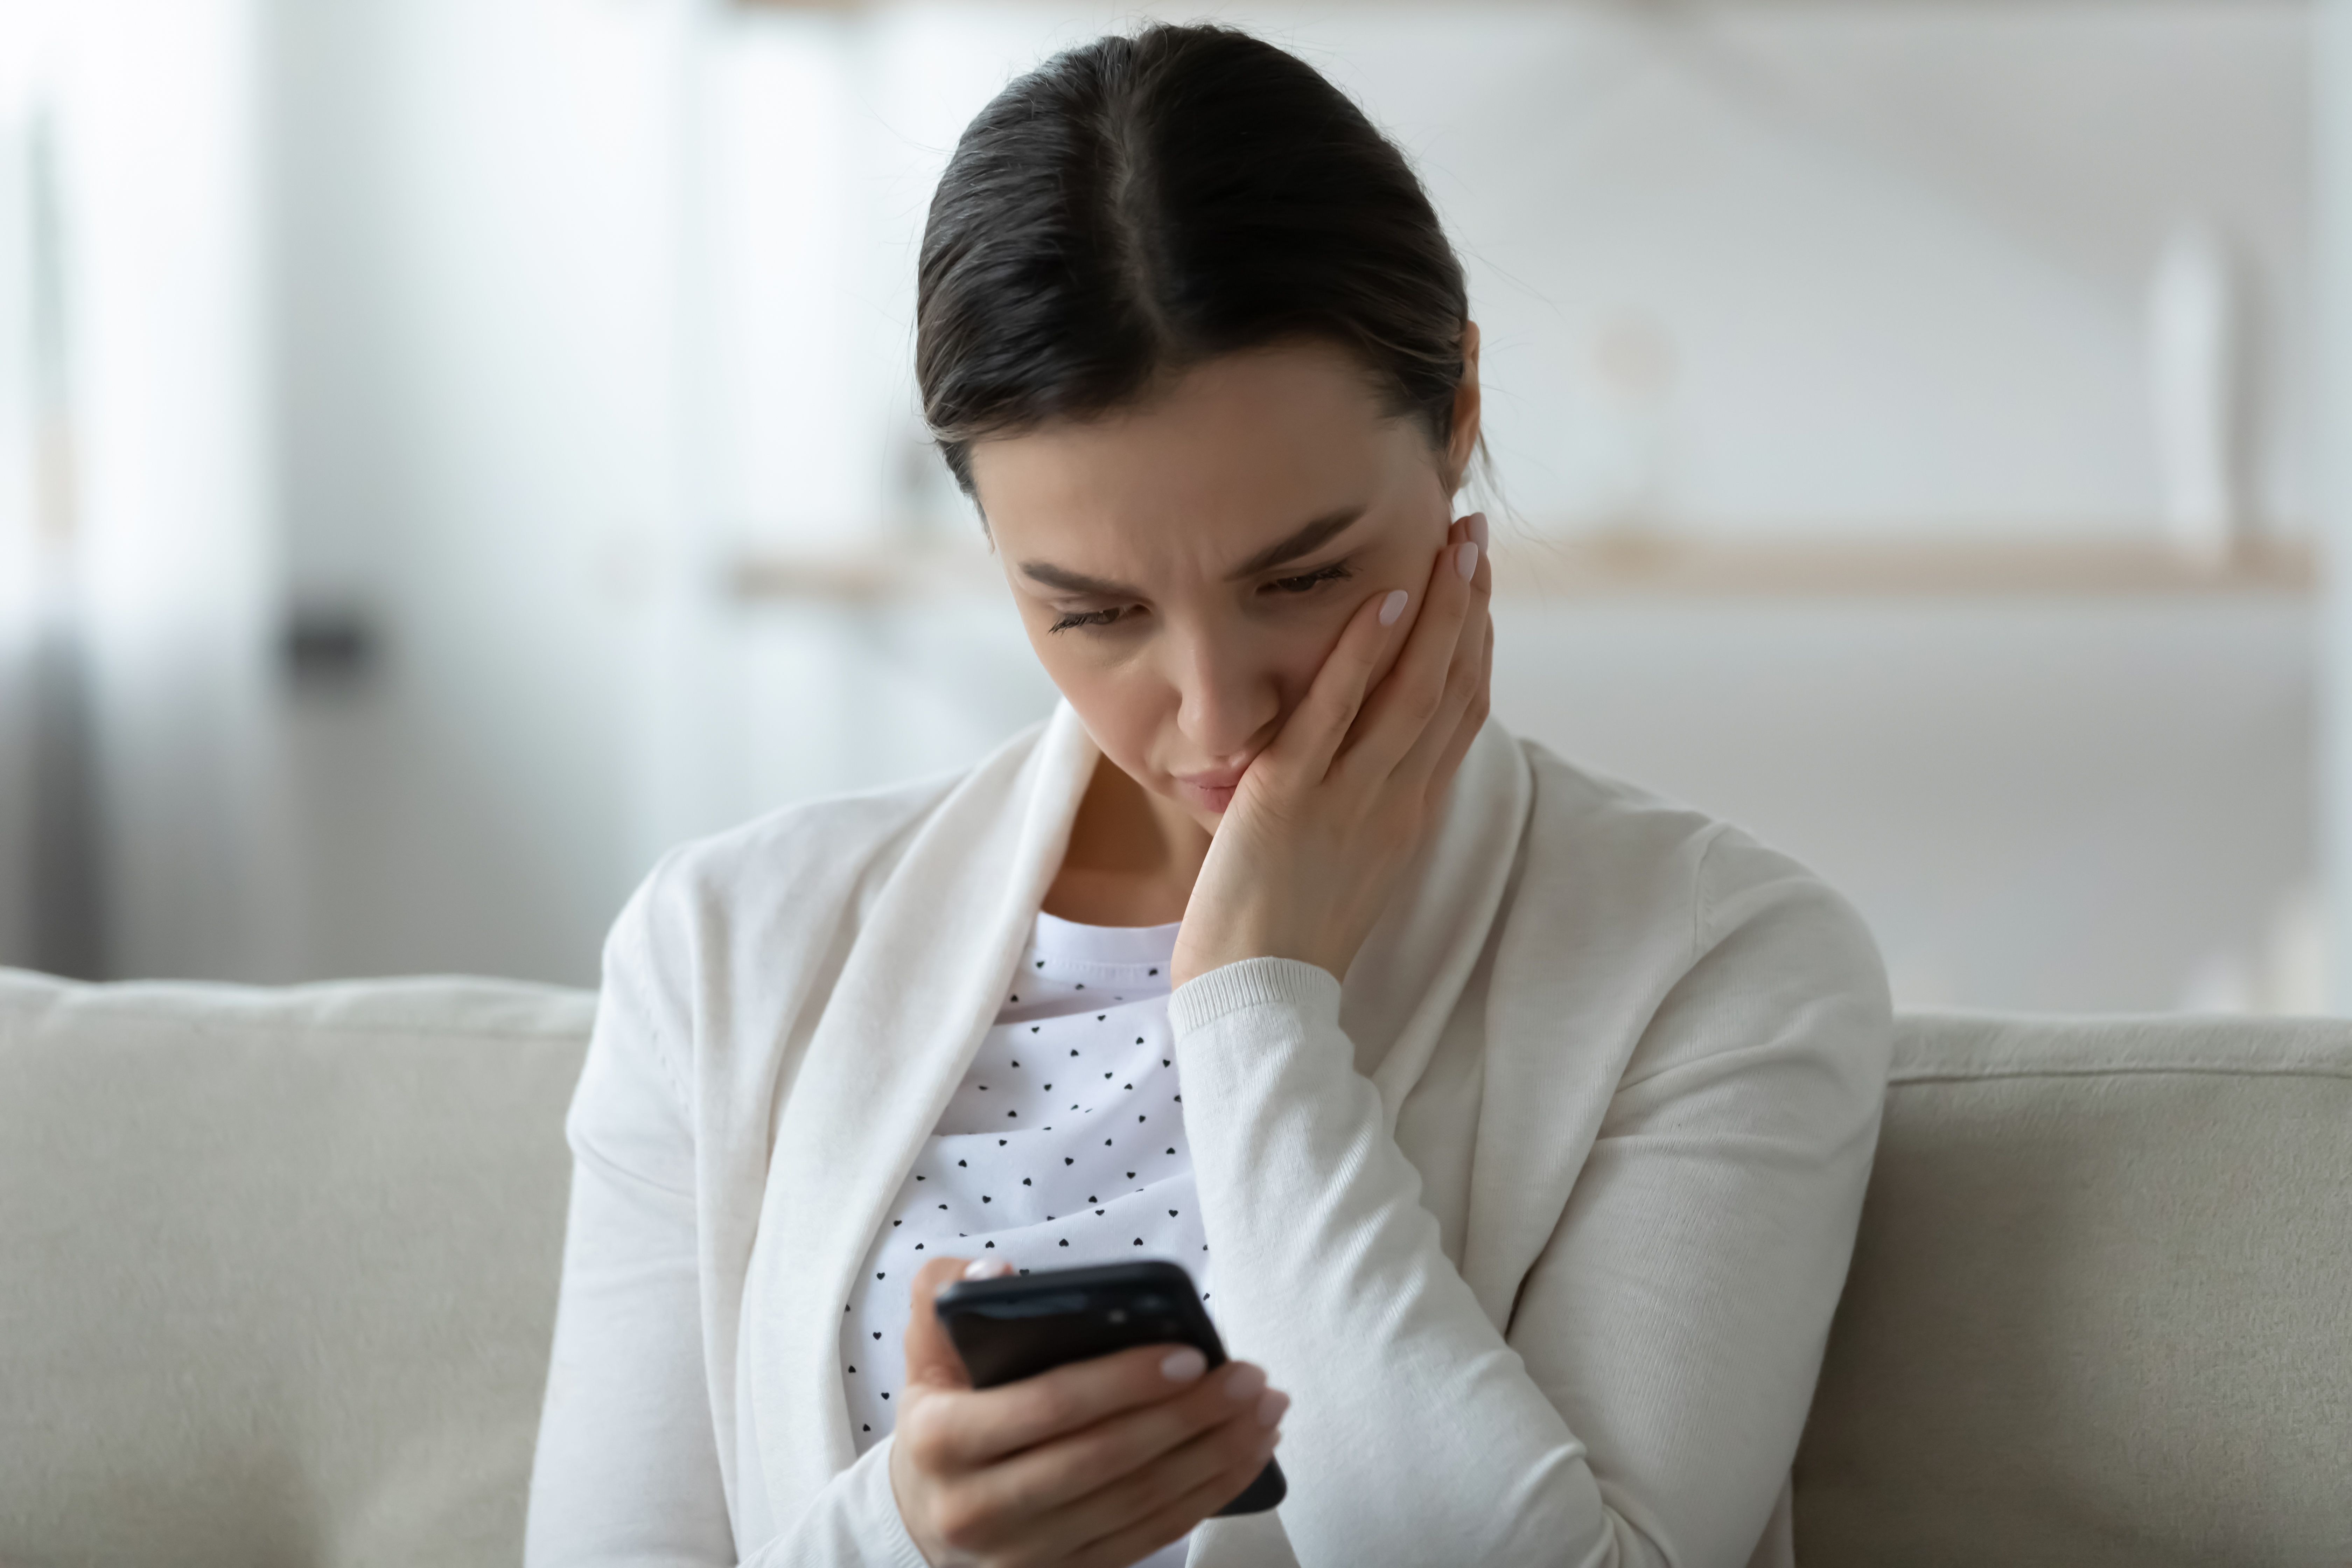 A troubled woman looking at her phone | Source: Shutterstock